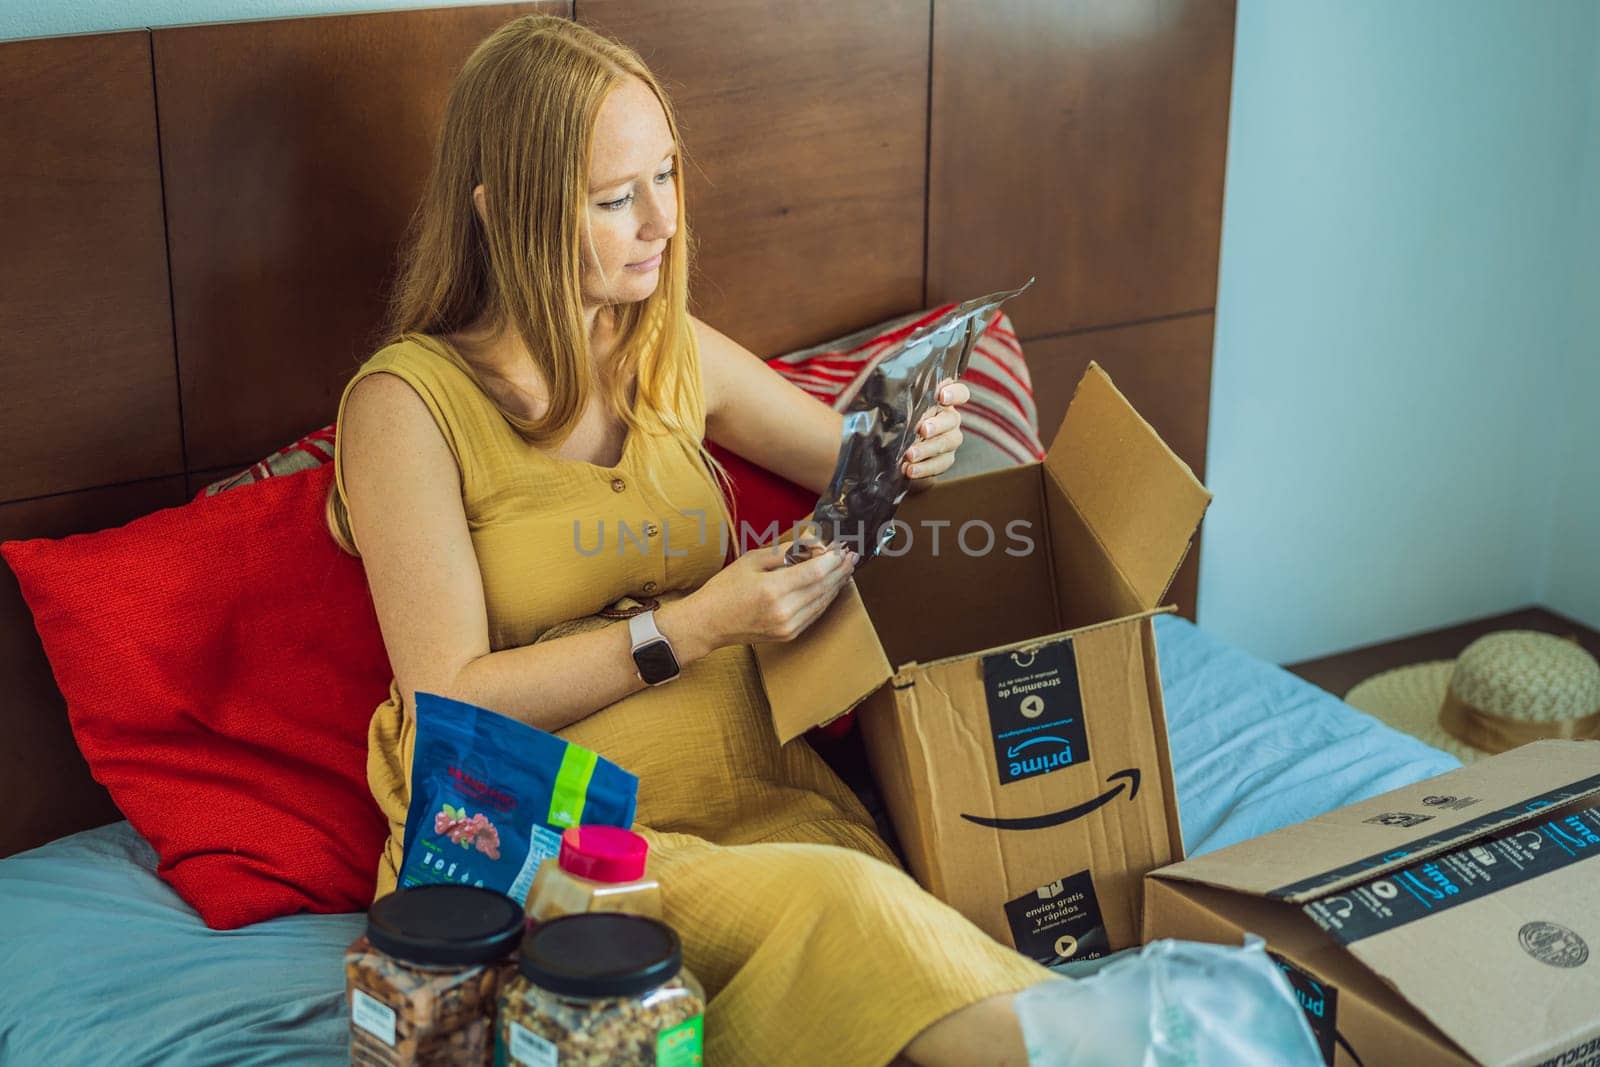 12.21.22, Mexico, Playa del Carmen: A pregnant woman received a package from Amazon. The woman pulls out the nuts she ordered from Amazon. Online shopping and healthy eating during pregnancy.